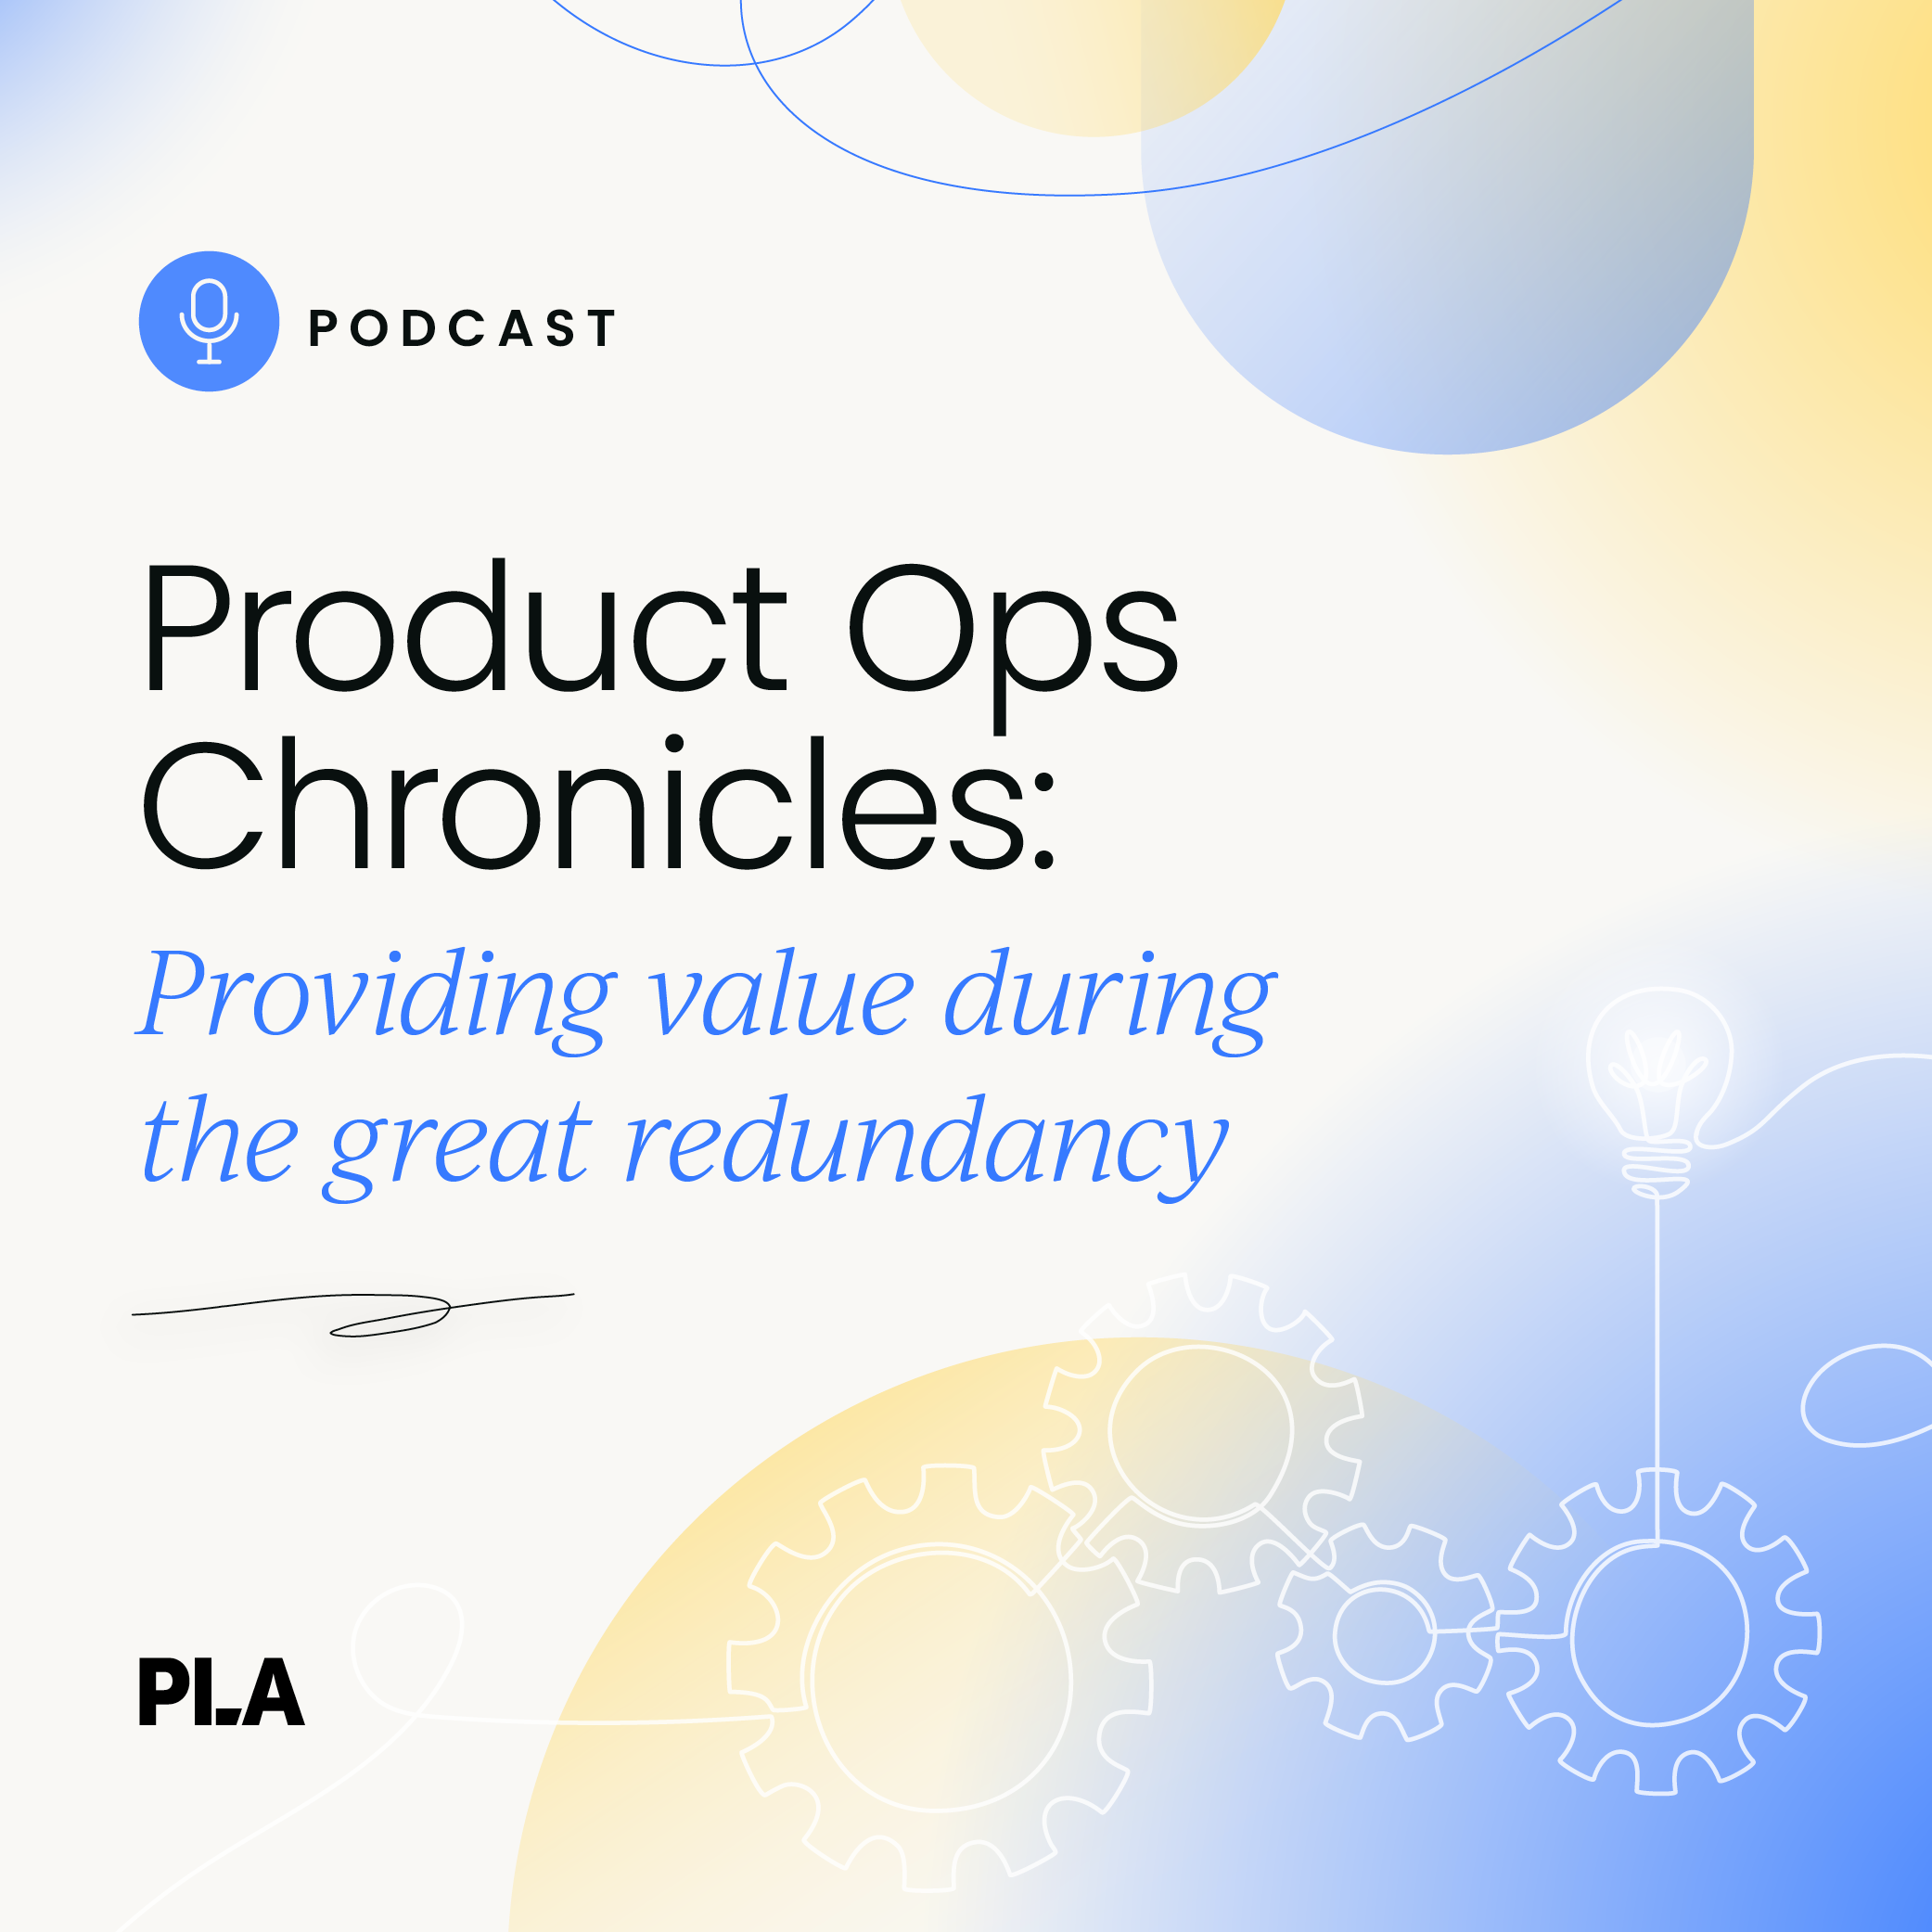 Product ops: Providing value during the great redundancy